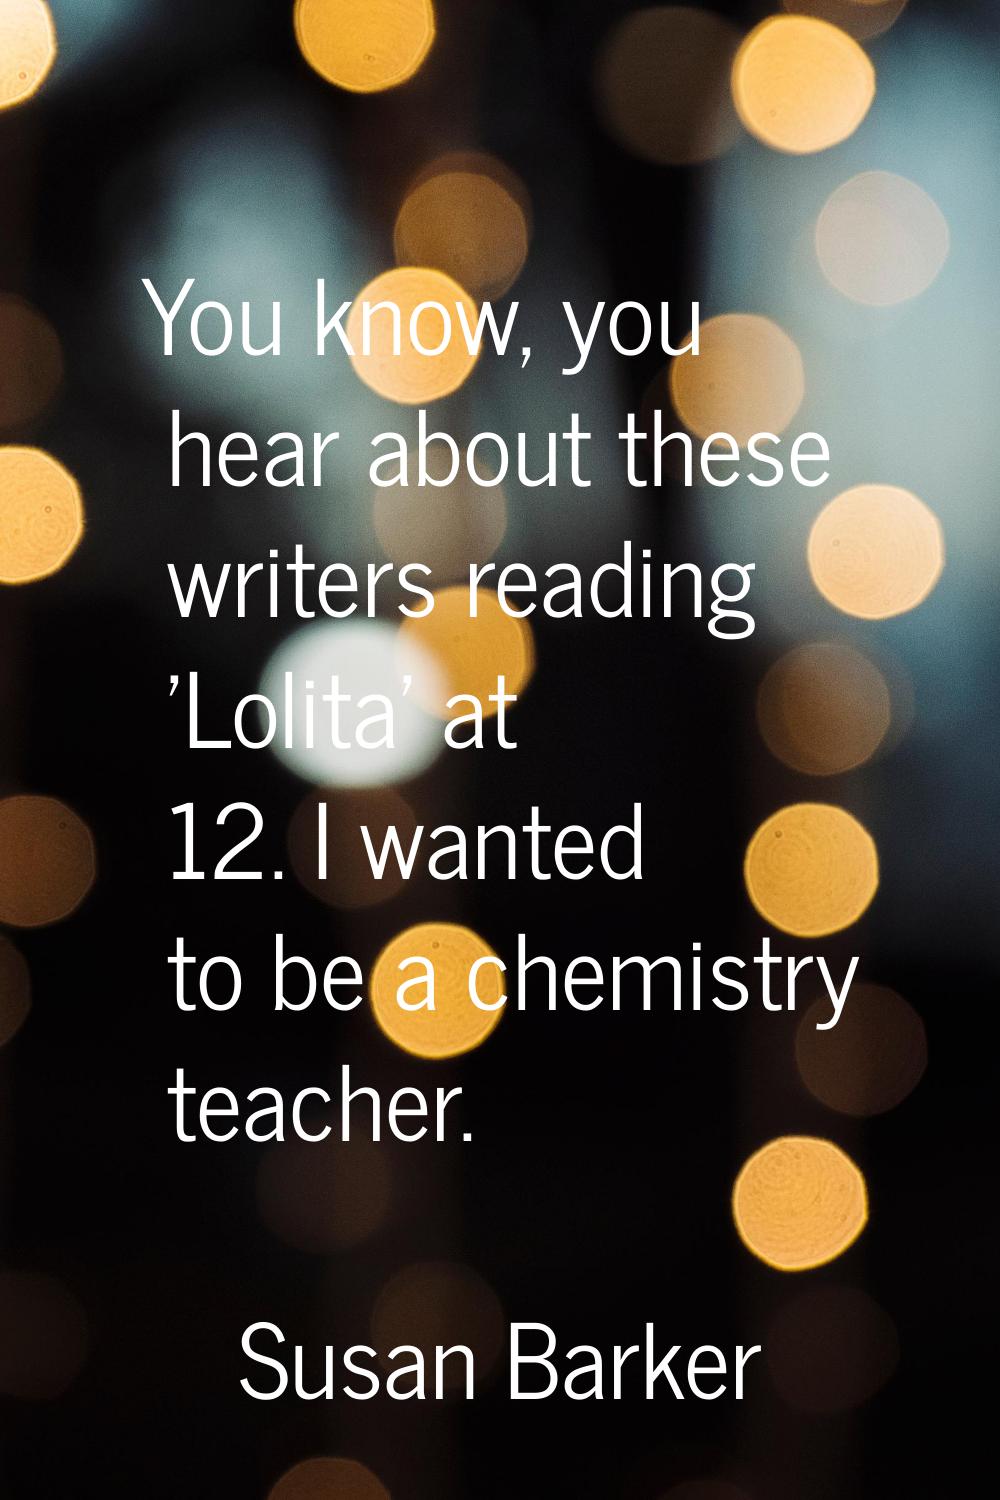 You know, you hear about these writers reading 'Lolita' at 12. I wanted to be a chemistry teacher.